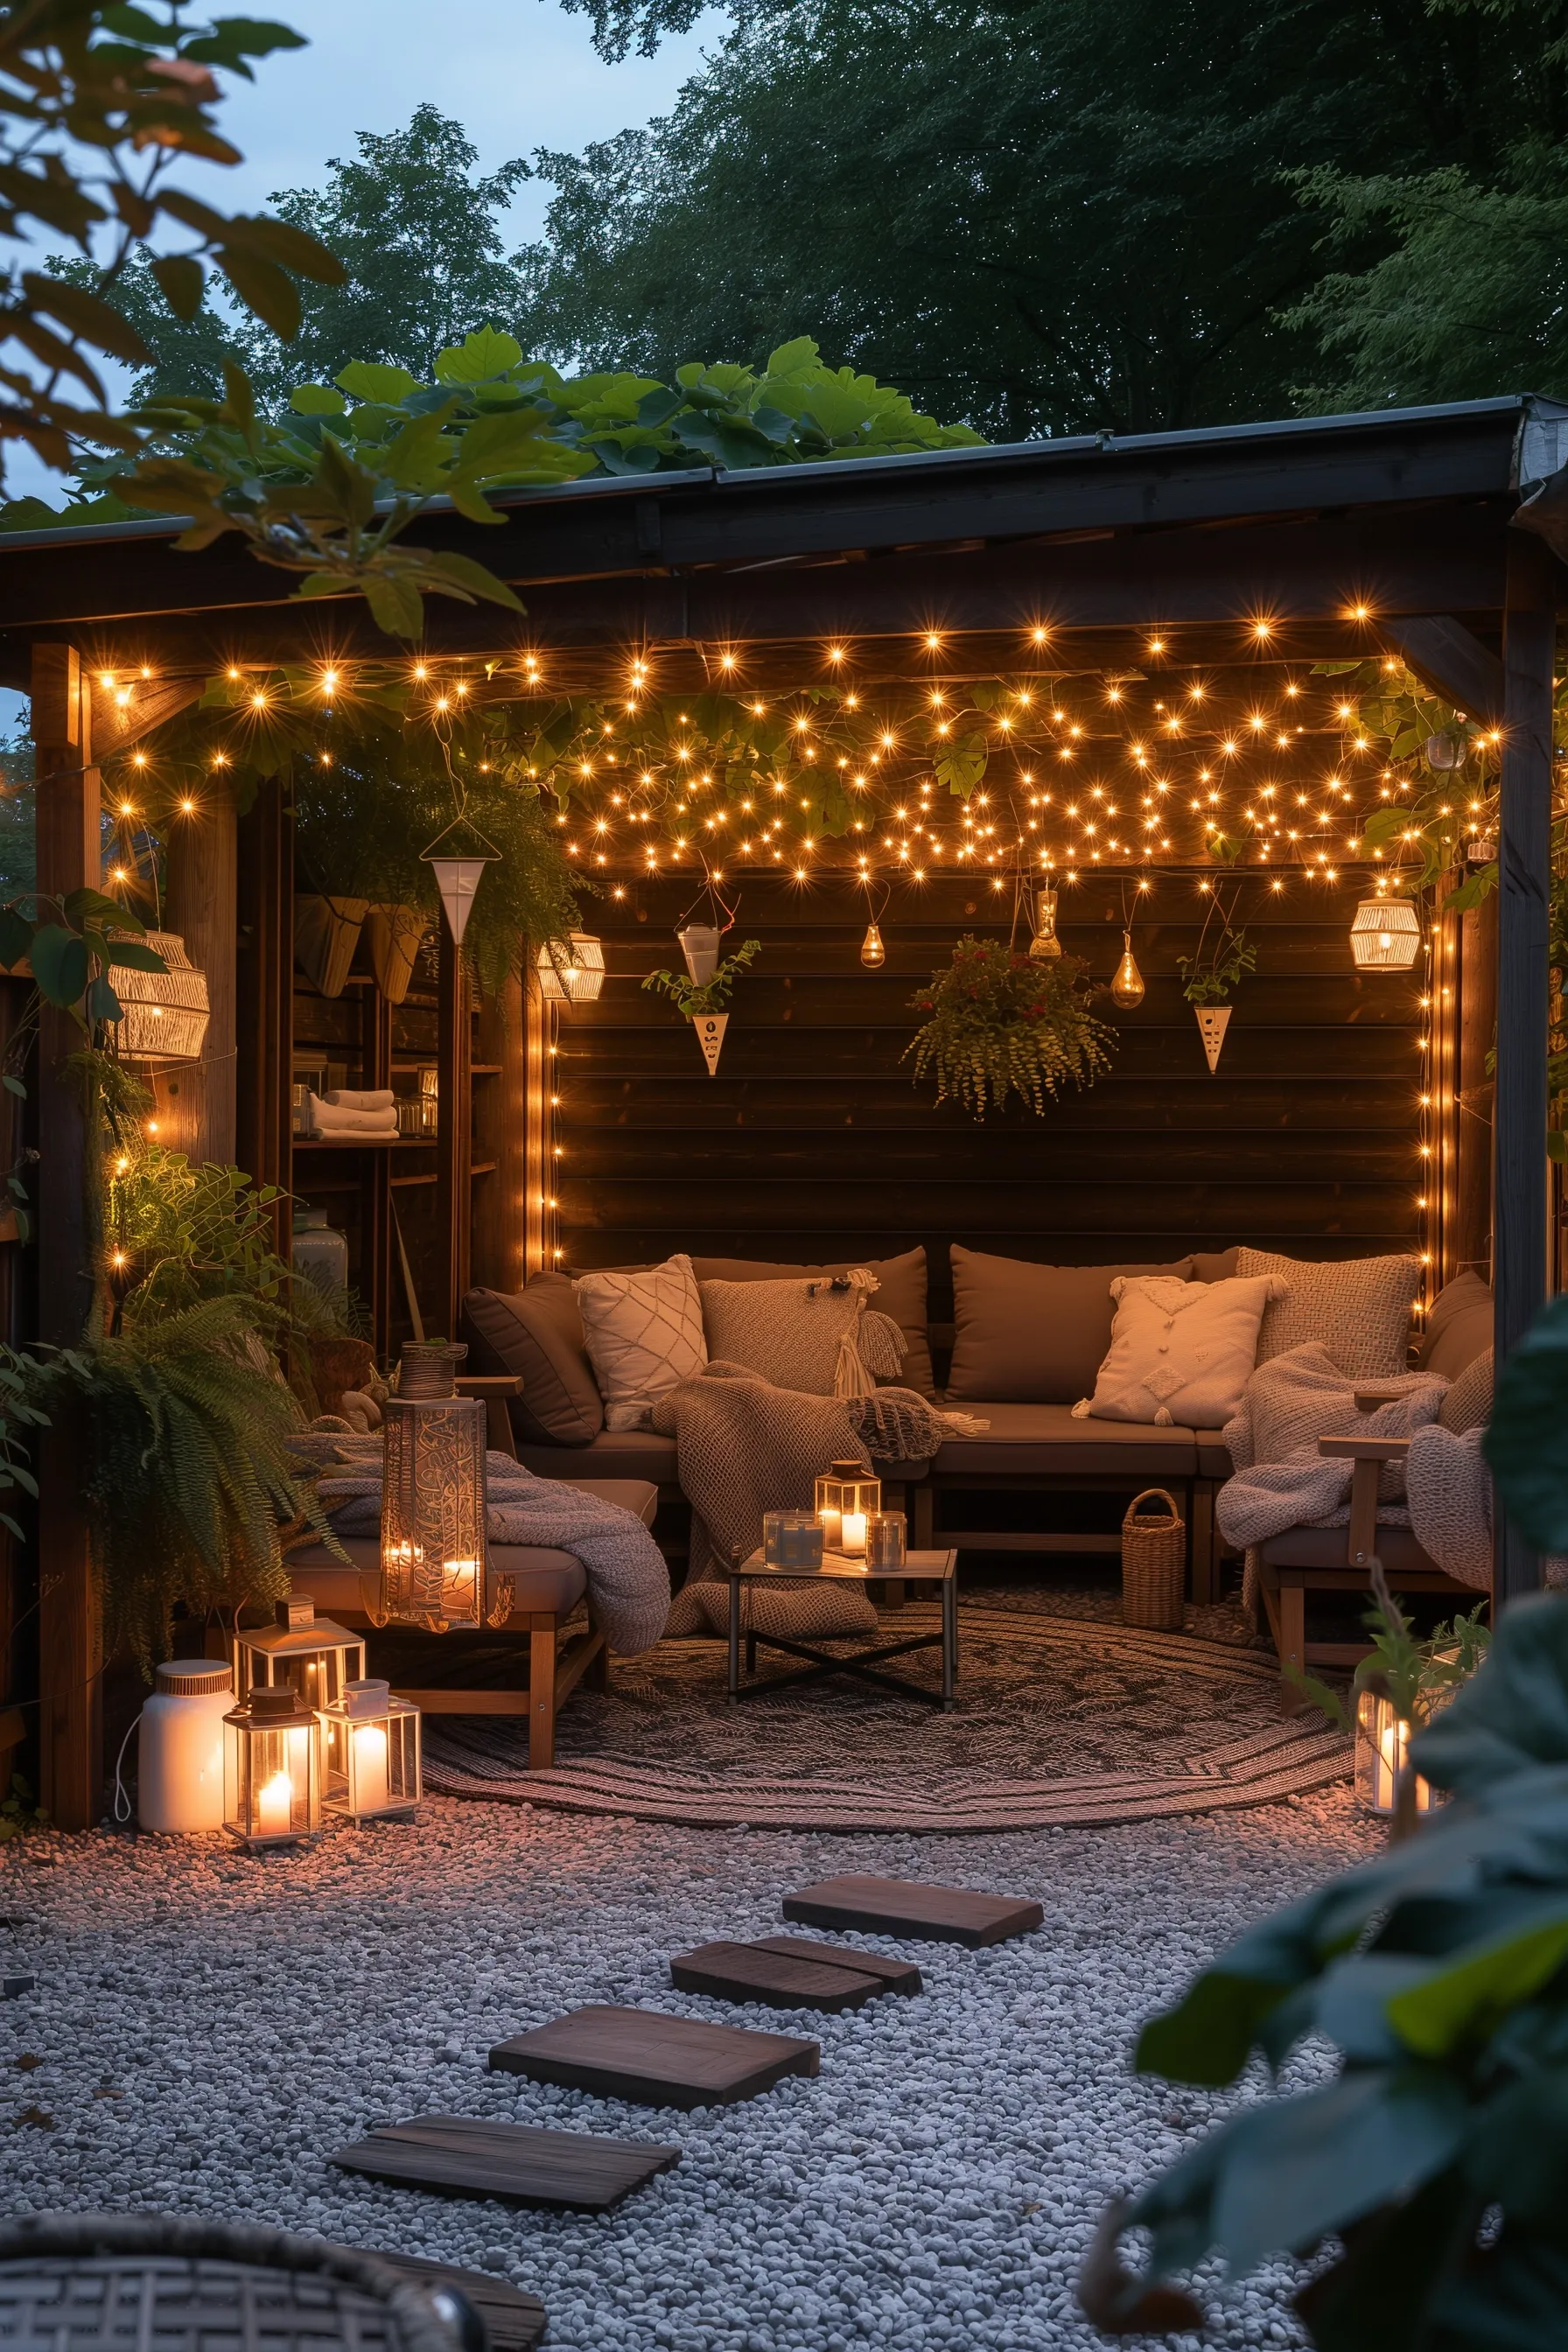 An outdoor man cave shed with fairy lights and lanterns